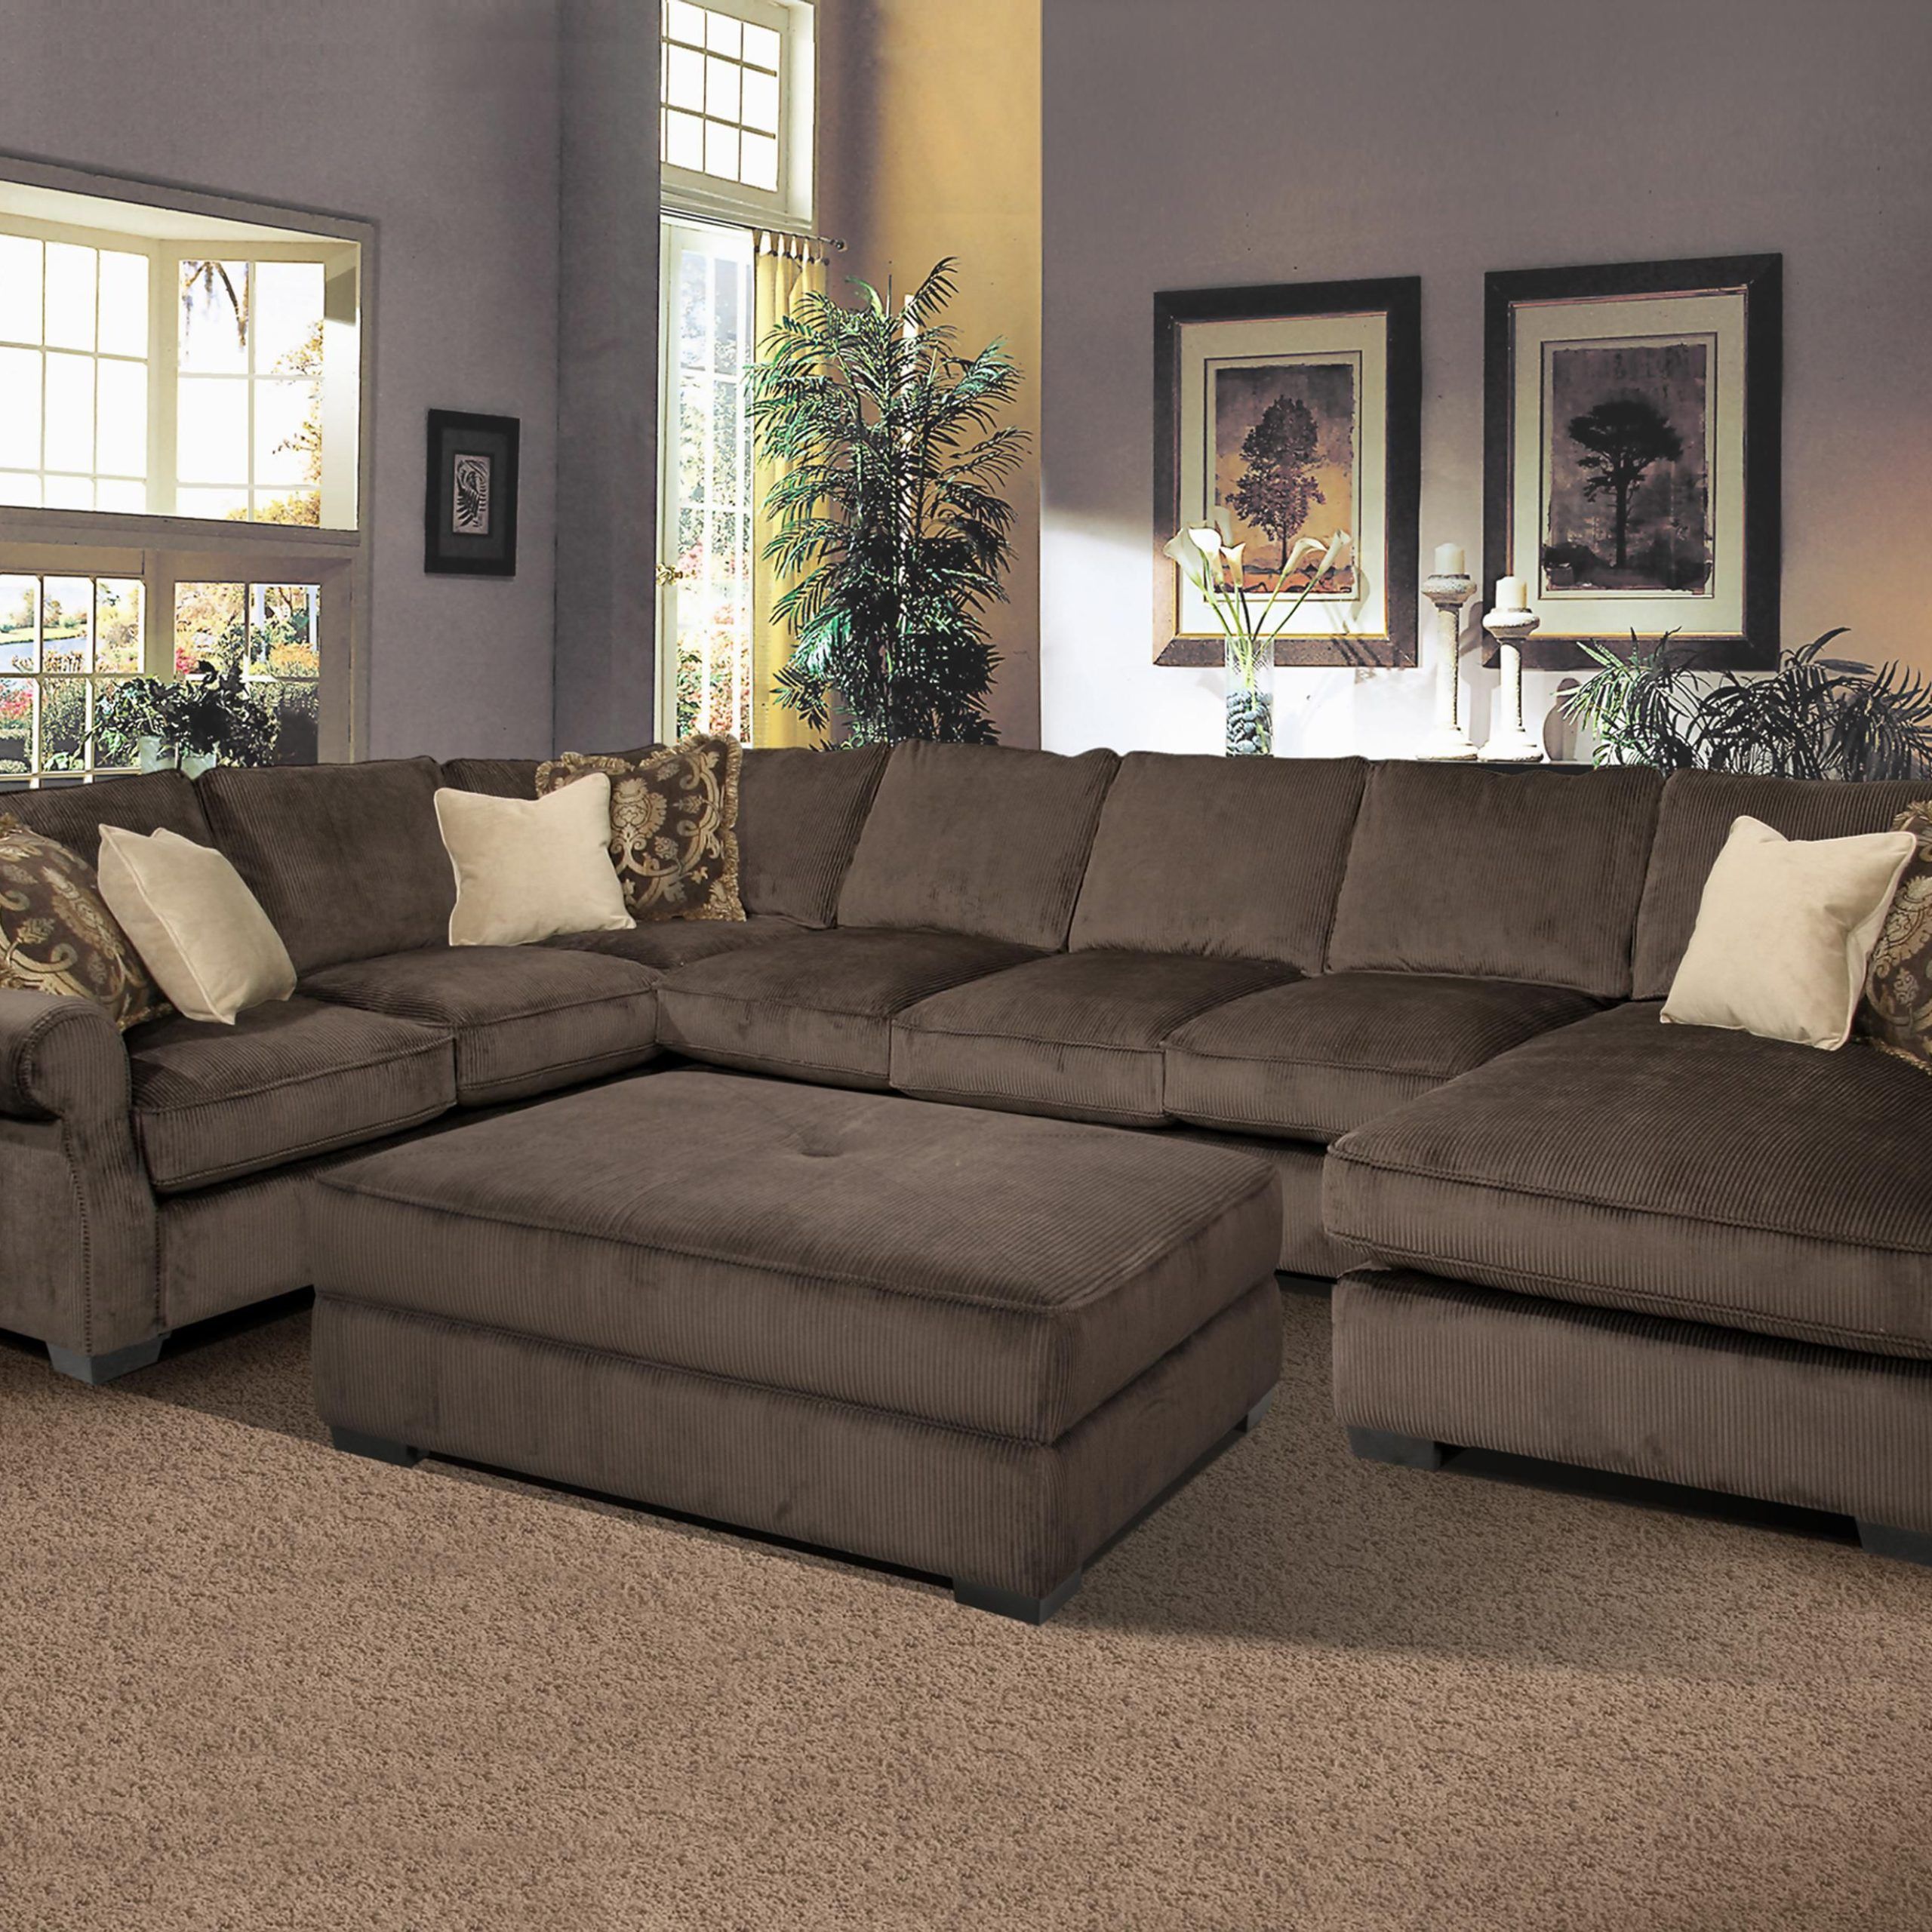 Microfiber Sectional Corner Sofas Inside Newest Furniture Elliot Fabric Microfiber 3 Piece Chaise Sectional Sofa (View 10 of 15)